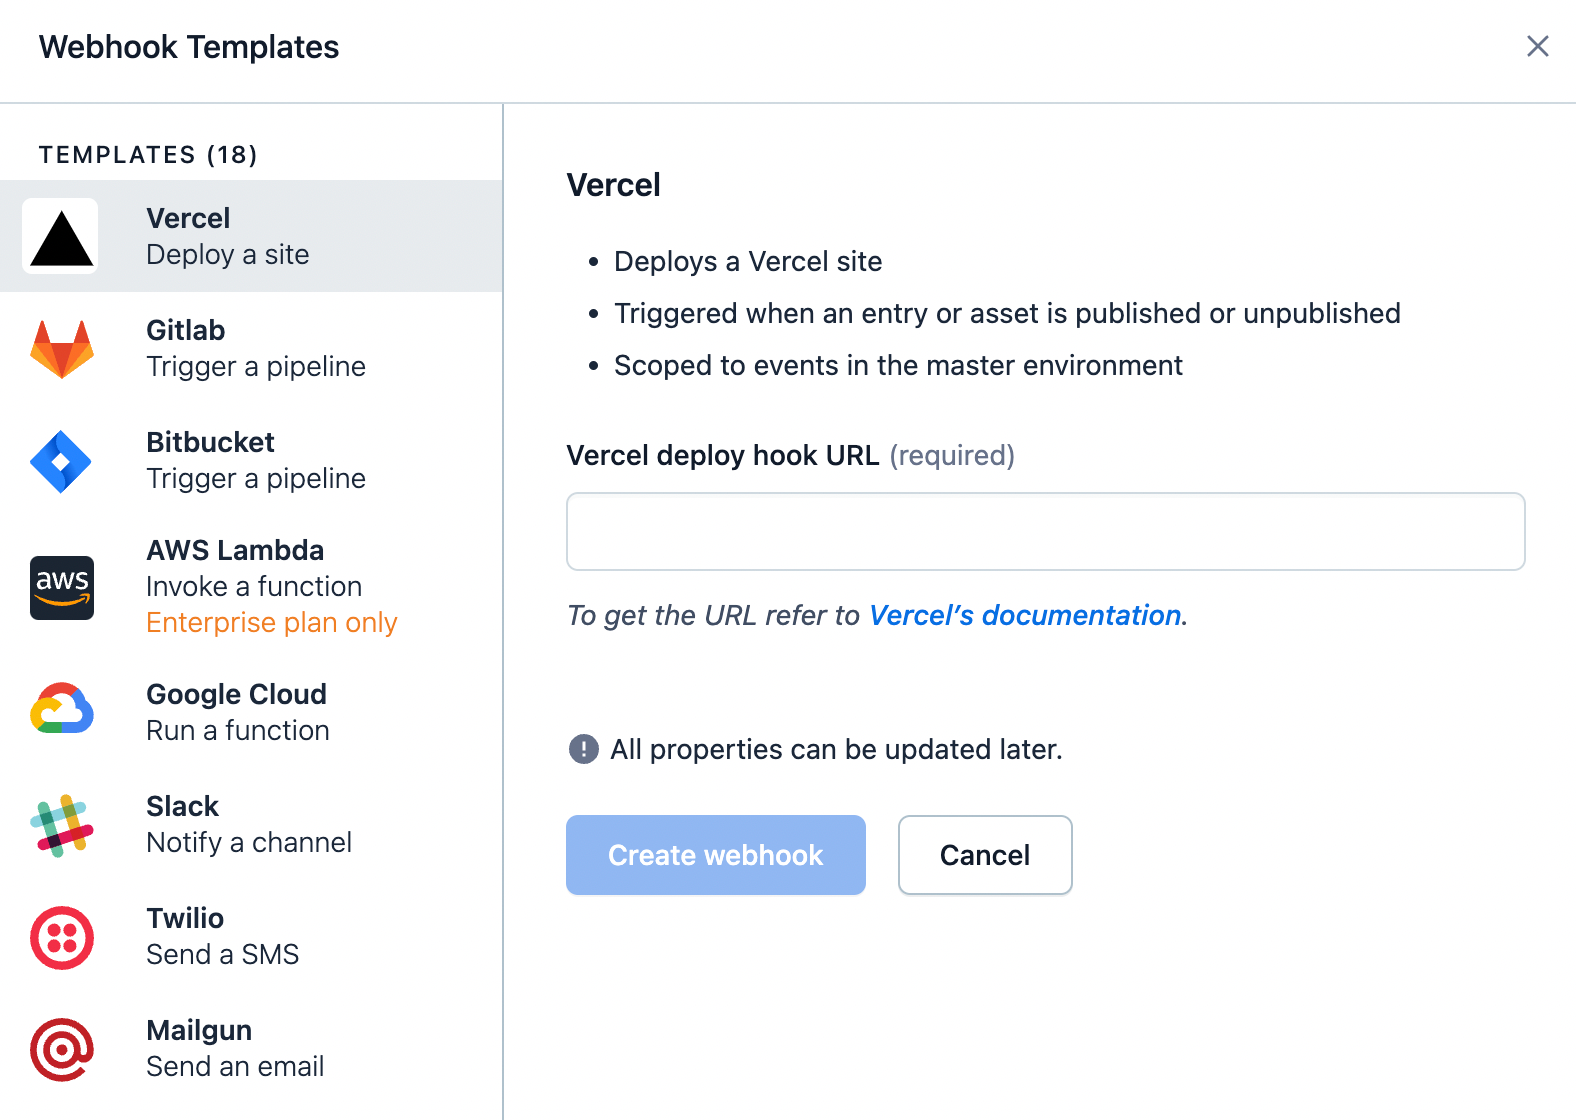 Add the Deploy Hook URL copied from Vercel's Dashboard in the input field.